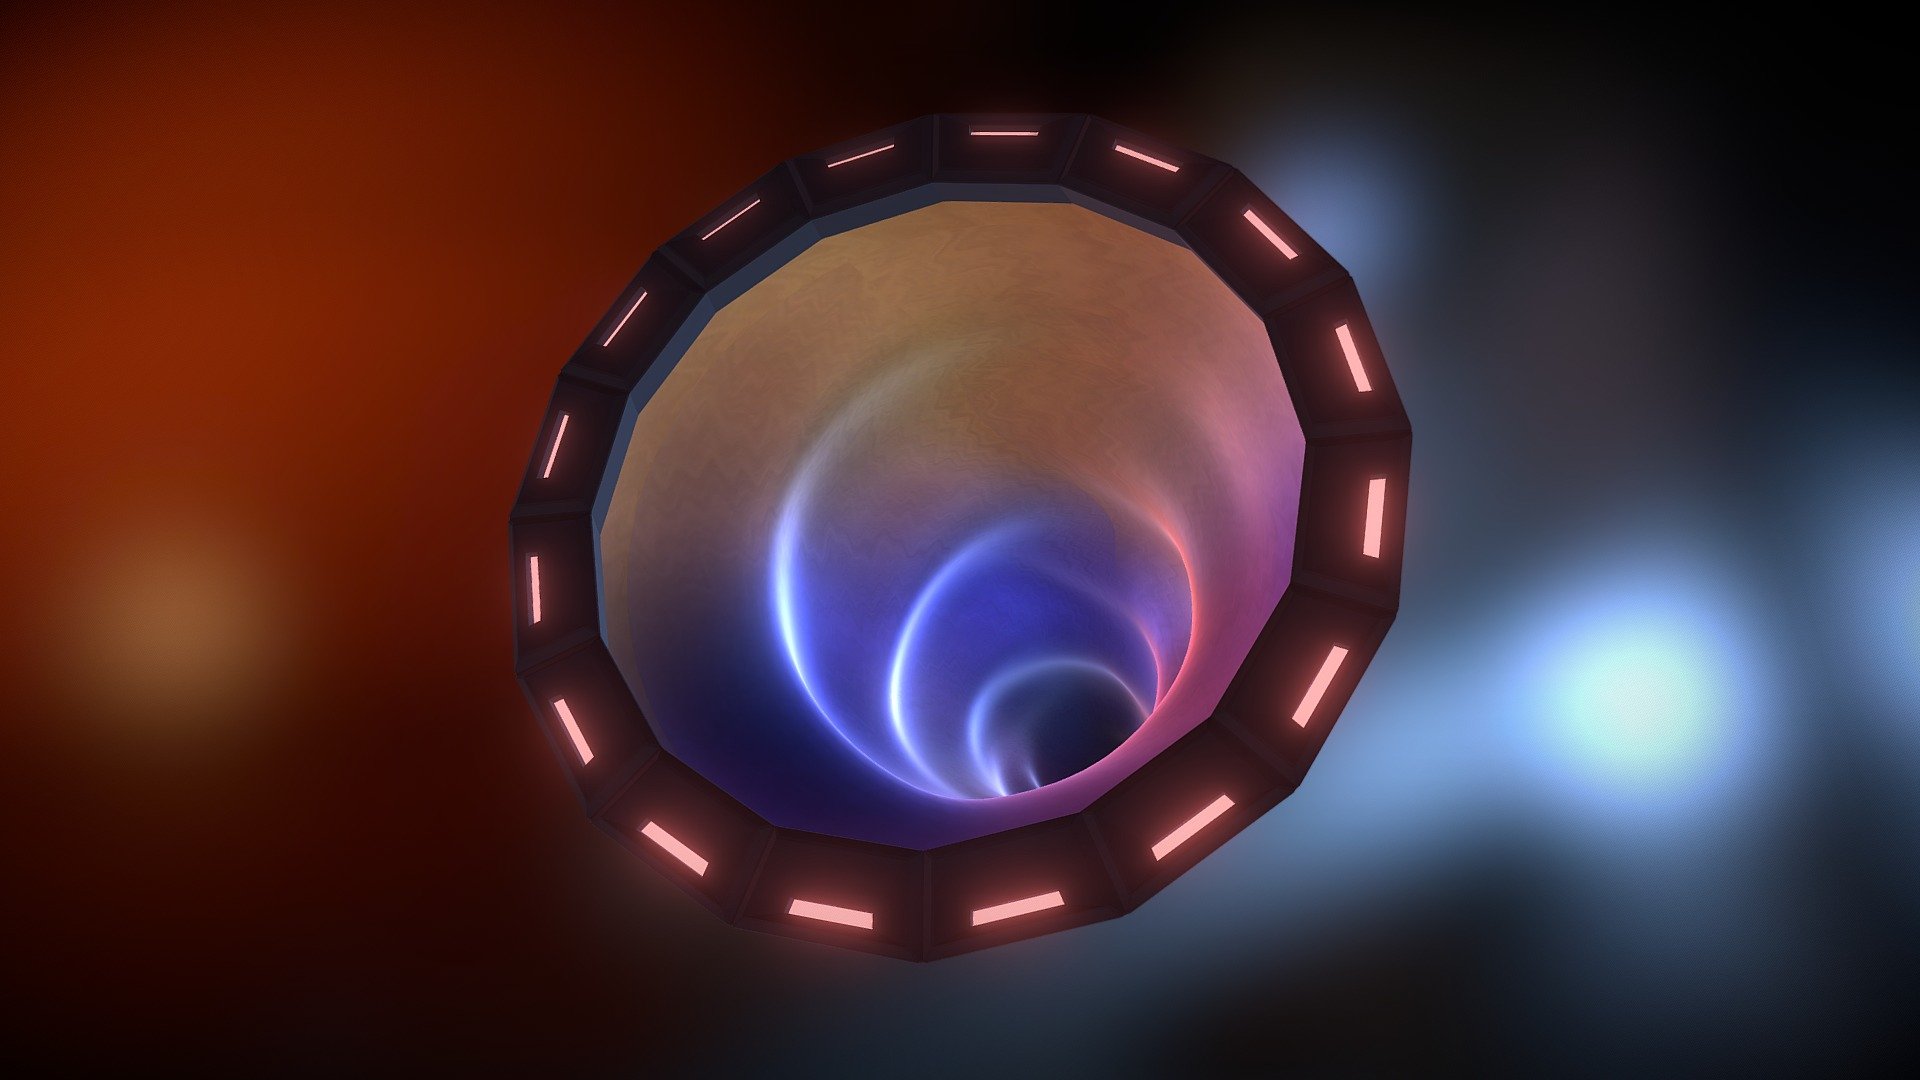 Ended up inside a rotating object while panning around another model. It wasn't pretty, but the idea was there. Thought I'd spin up a funnel to see how it looked here 3d model